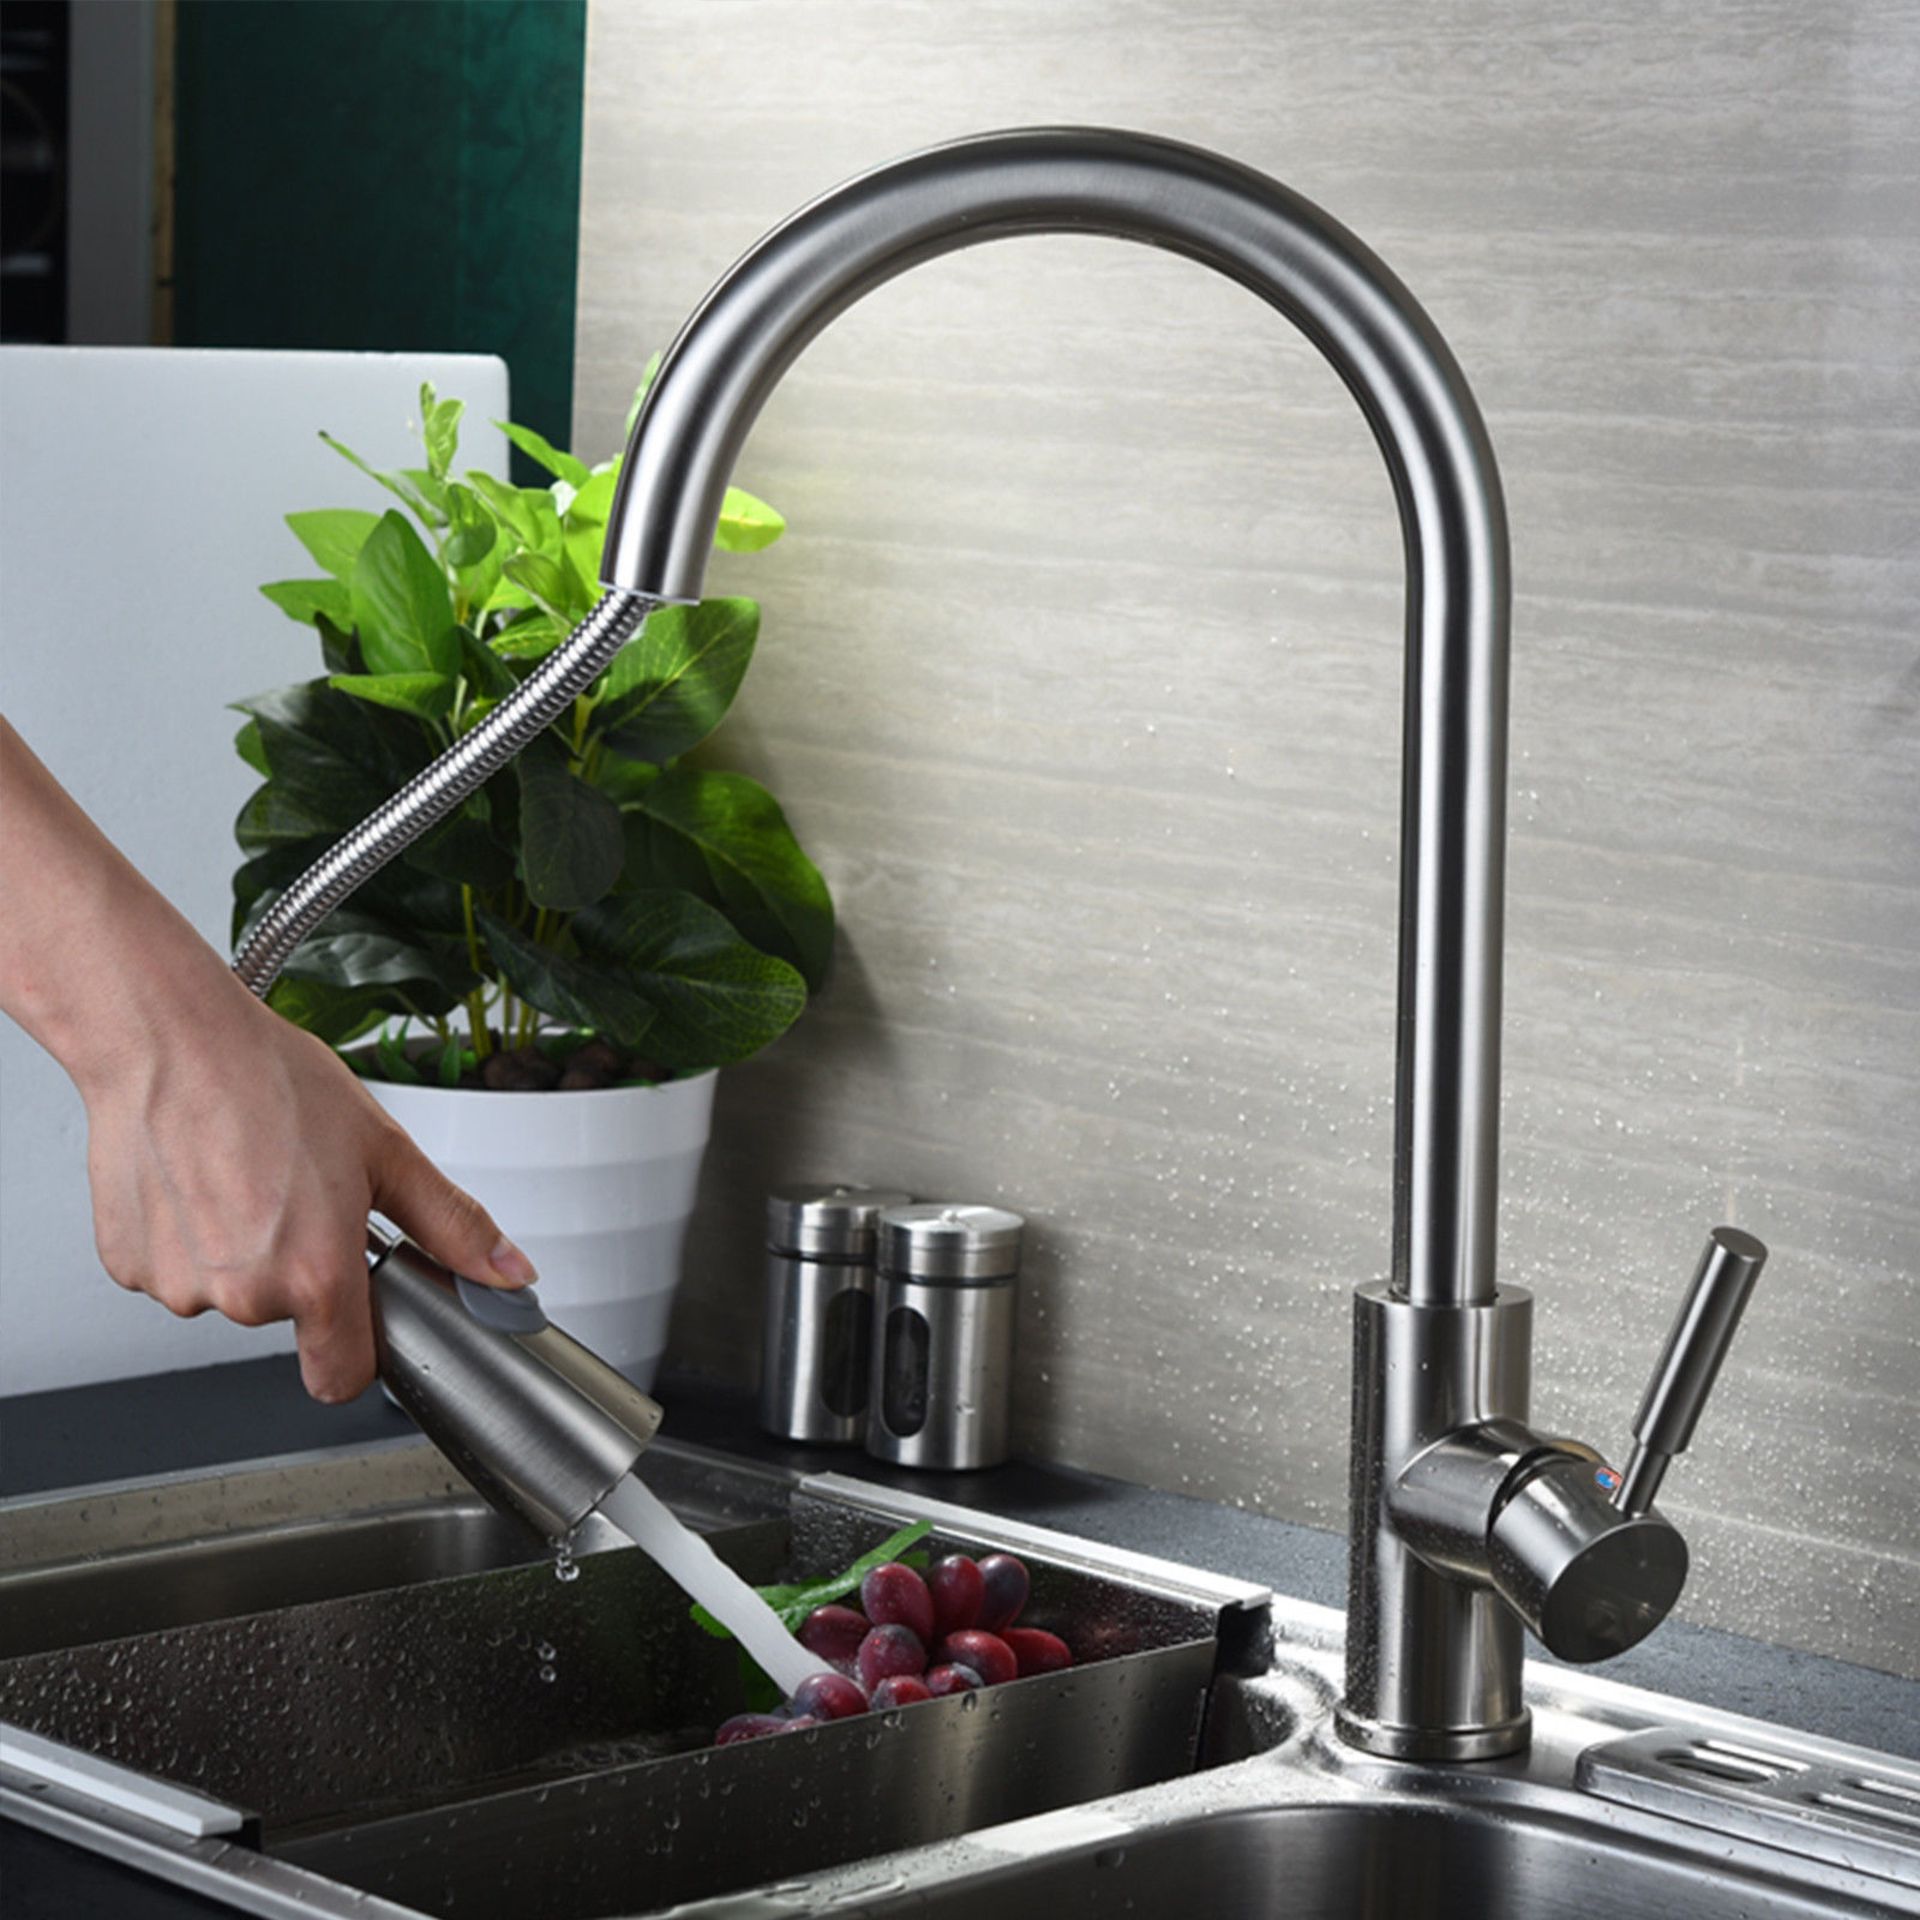 (SP241) Della Modern Monobloc Chrome Brass Pull Out Spray Mixer Tap. RRP £299.99. This tap is from